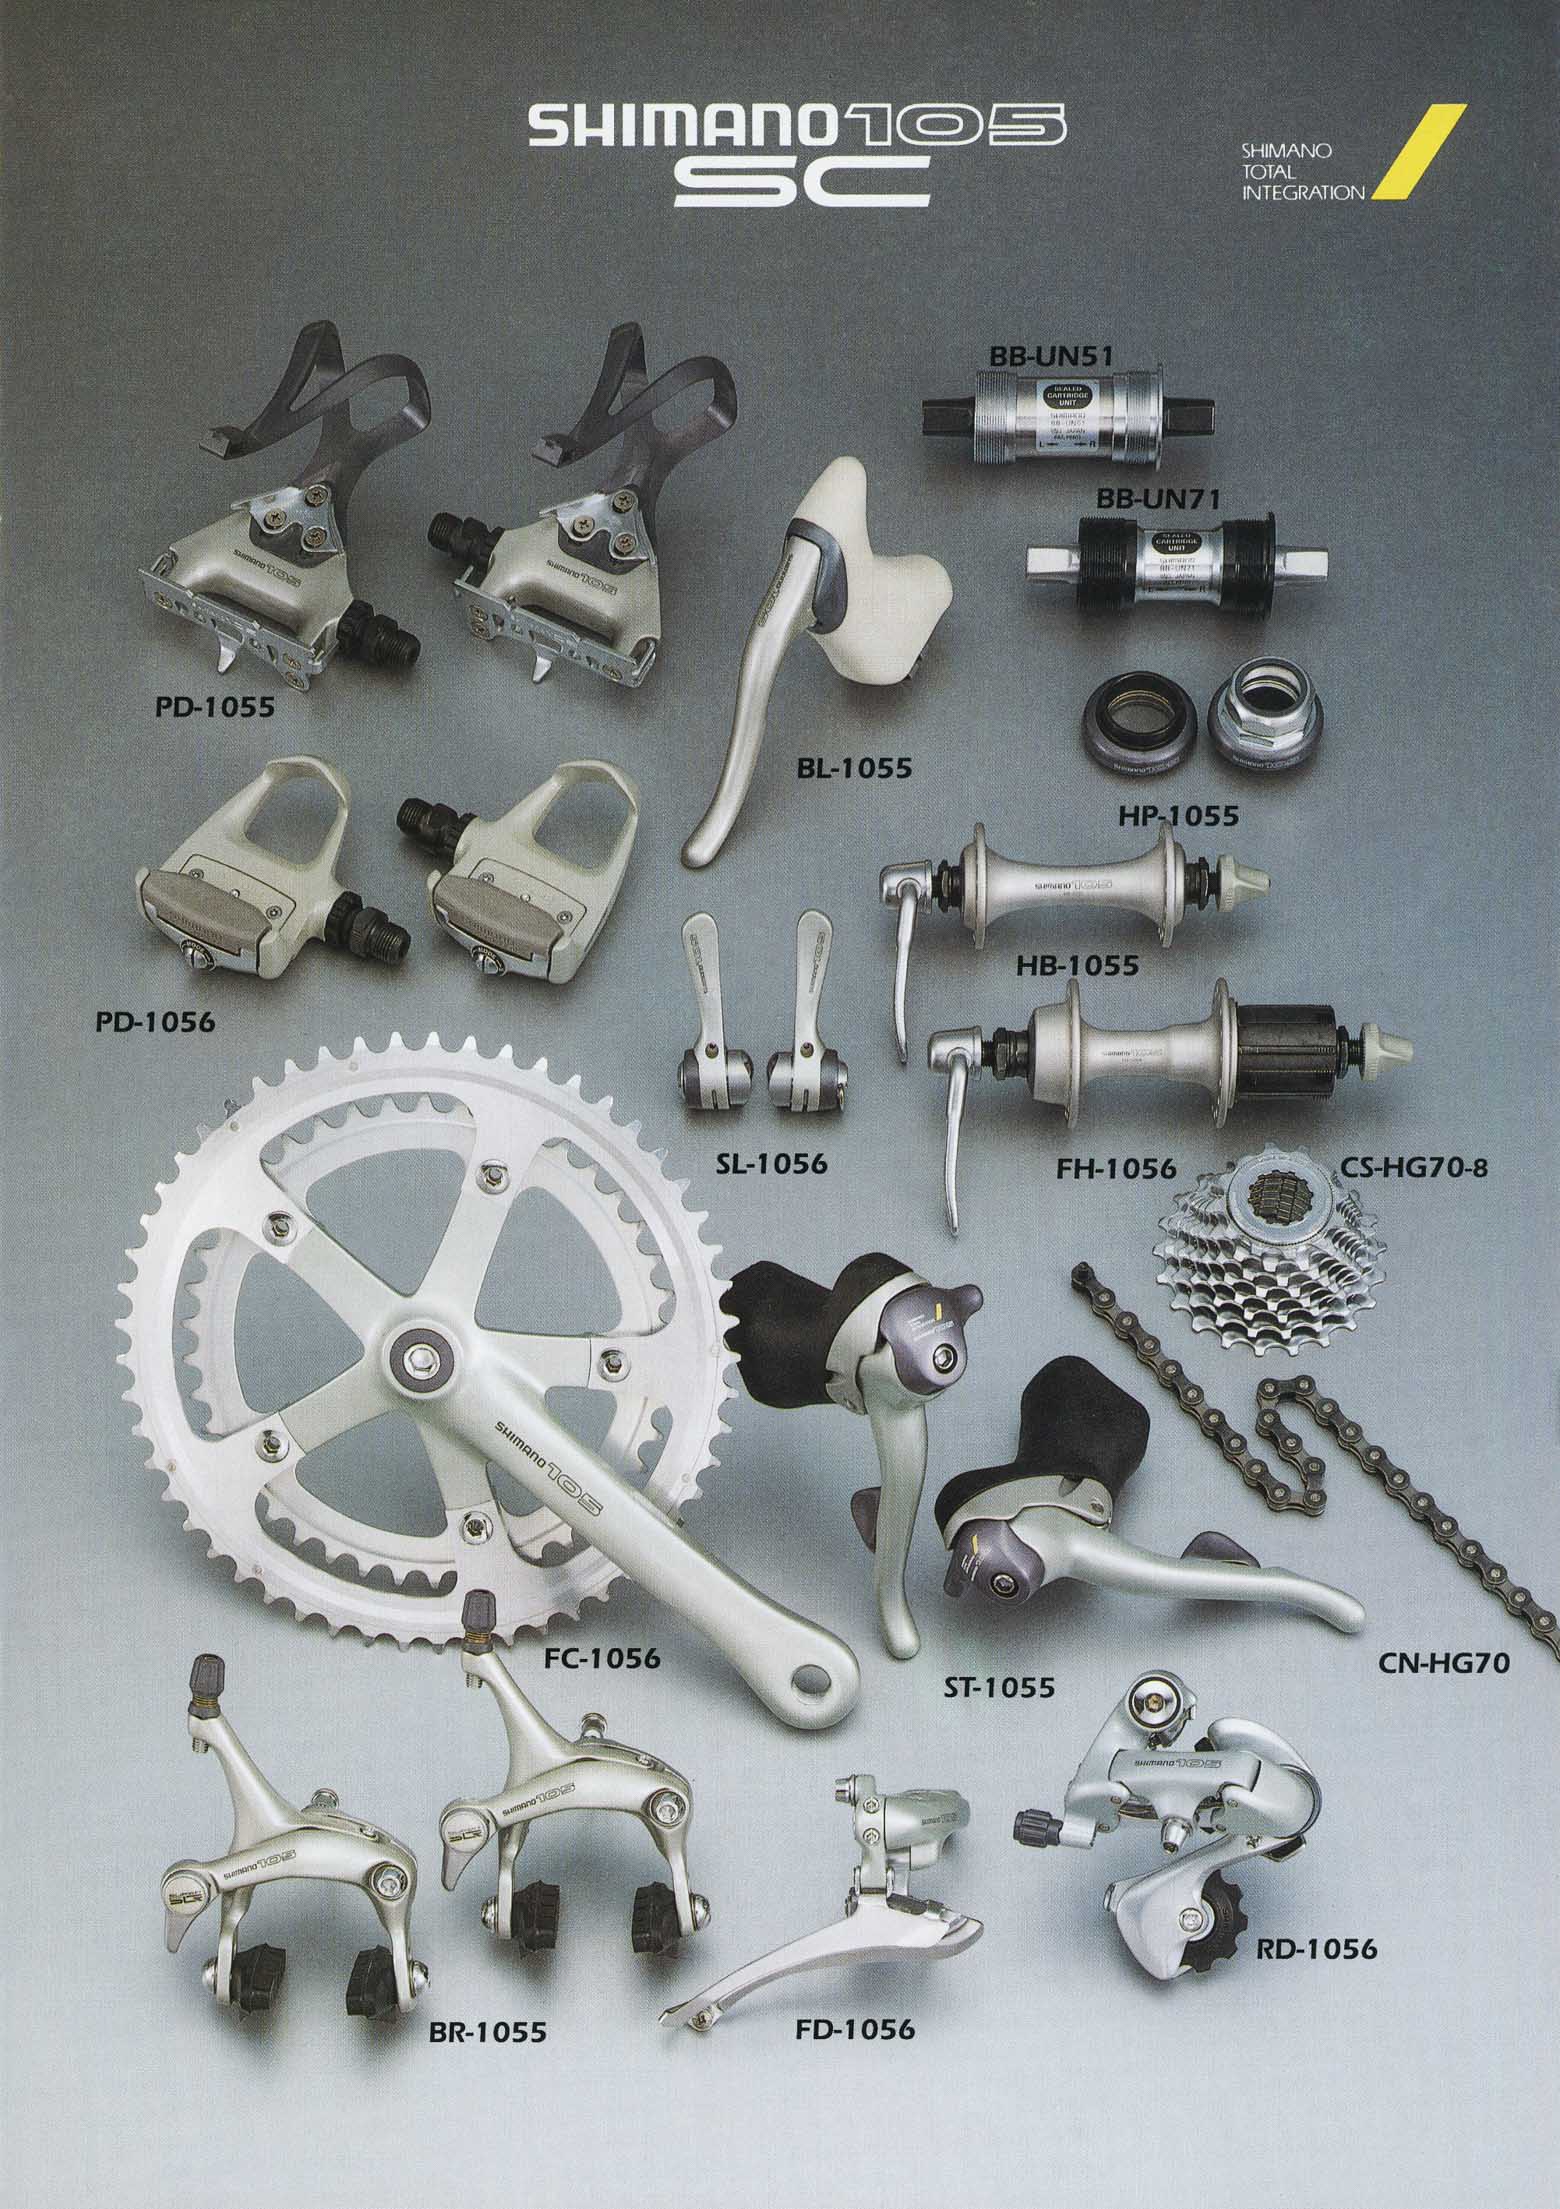 shimano_bicycle_system_components_-_93_page_059_main_image.jpg